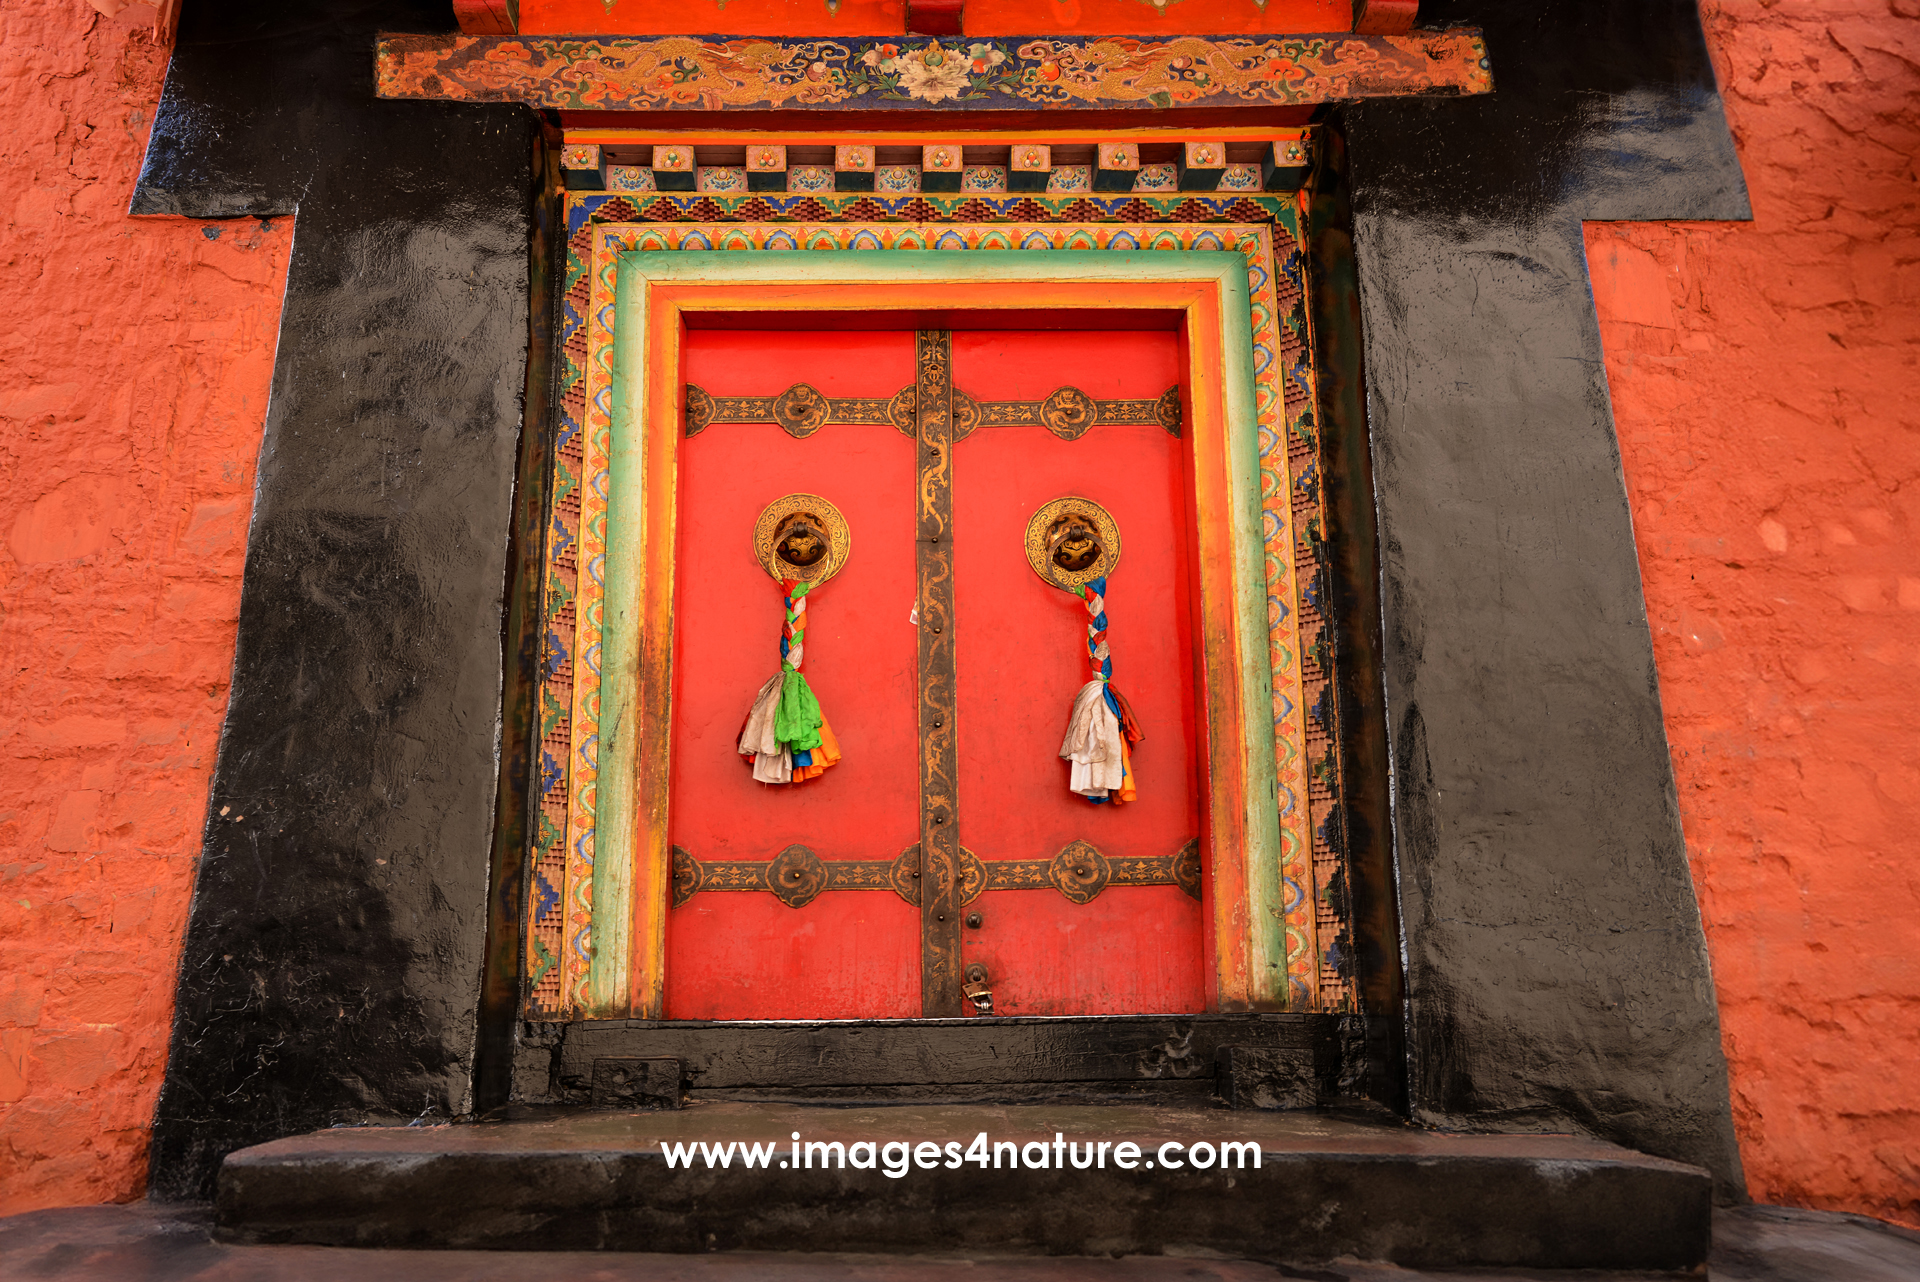 Orange wall with a massive black portal hosting a nicely decorated red wooden door